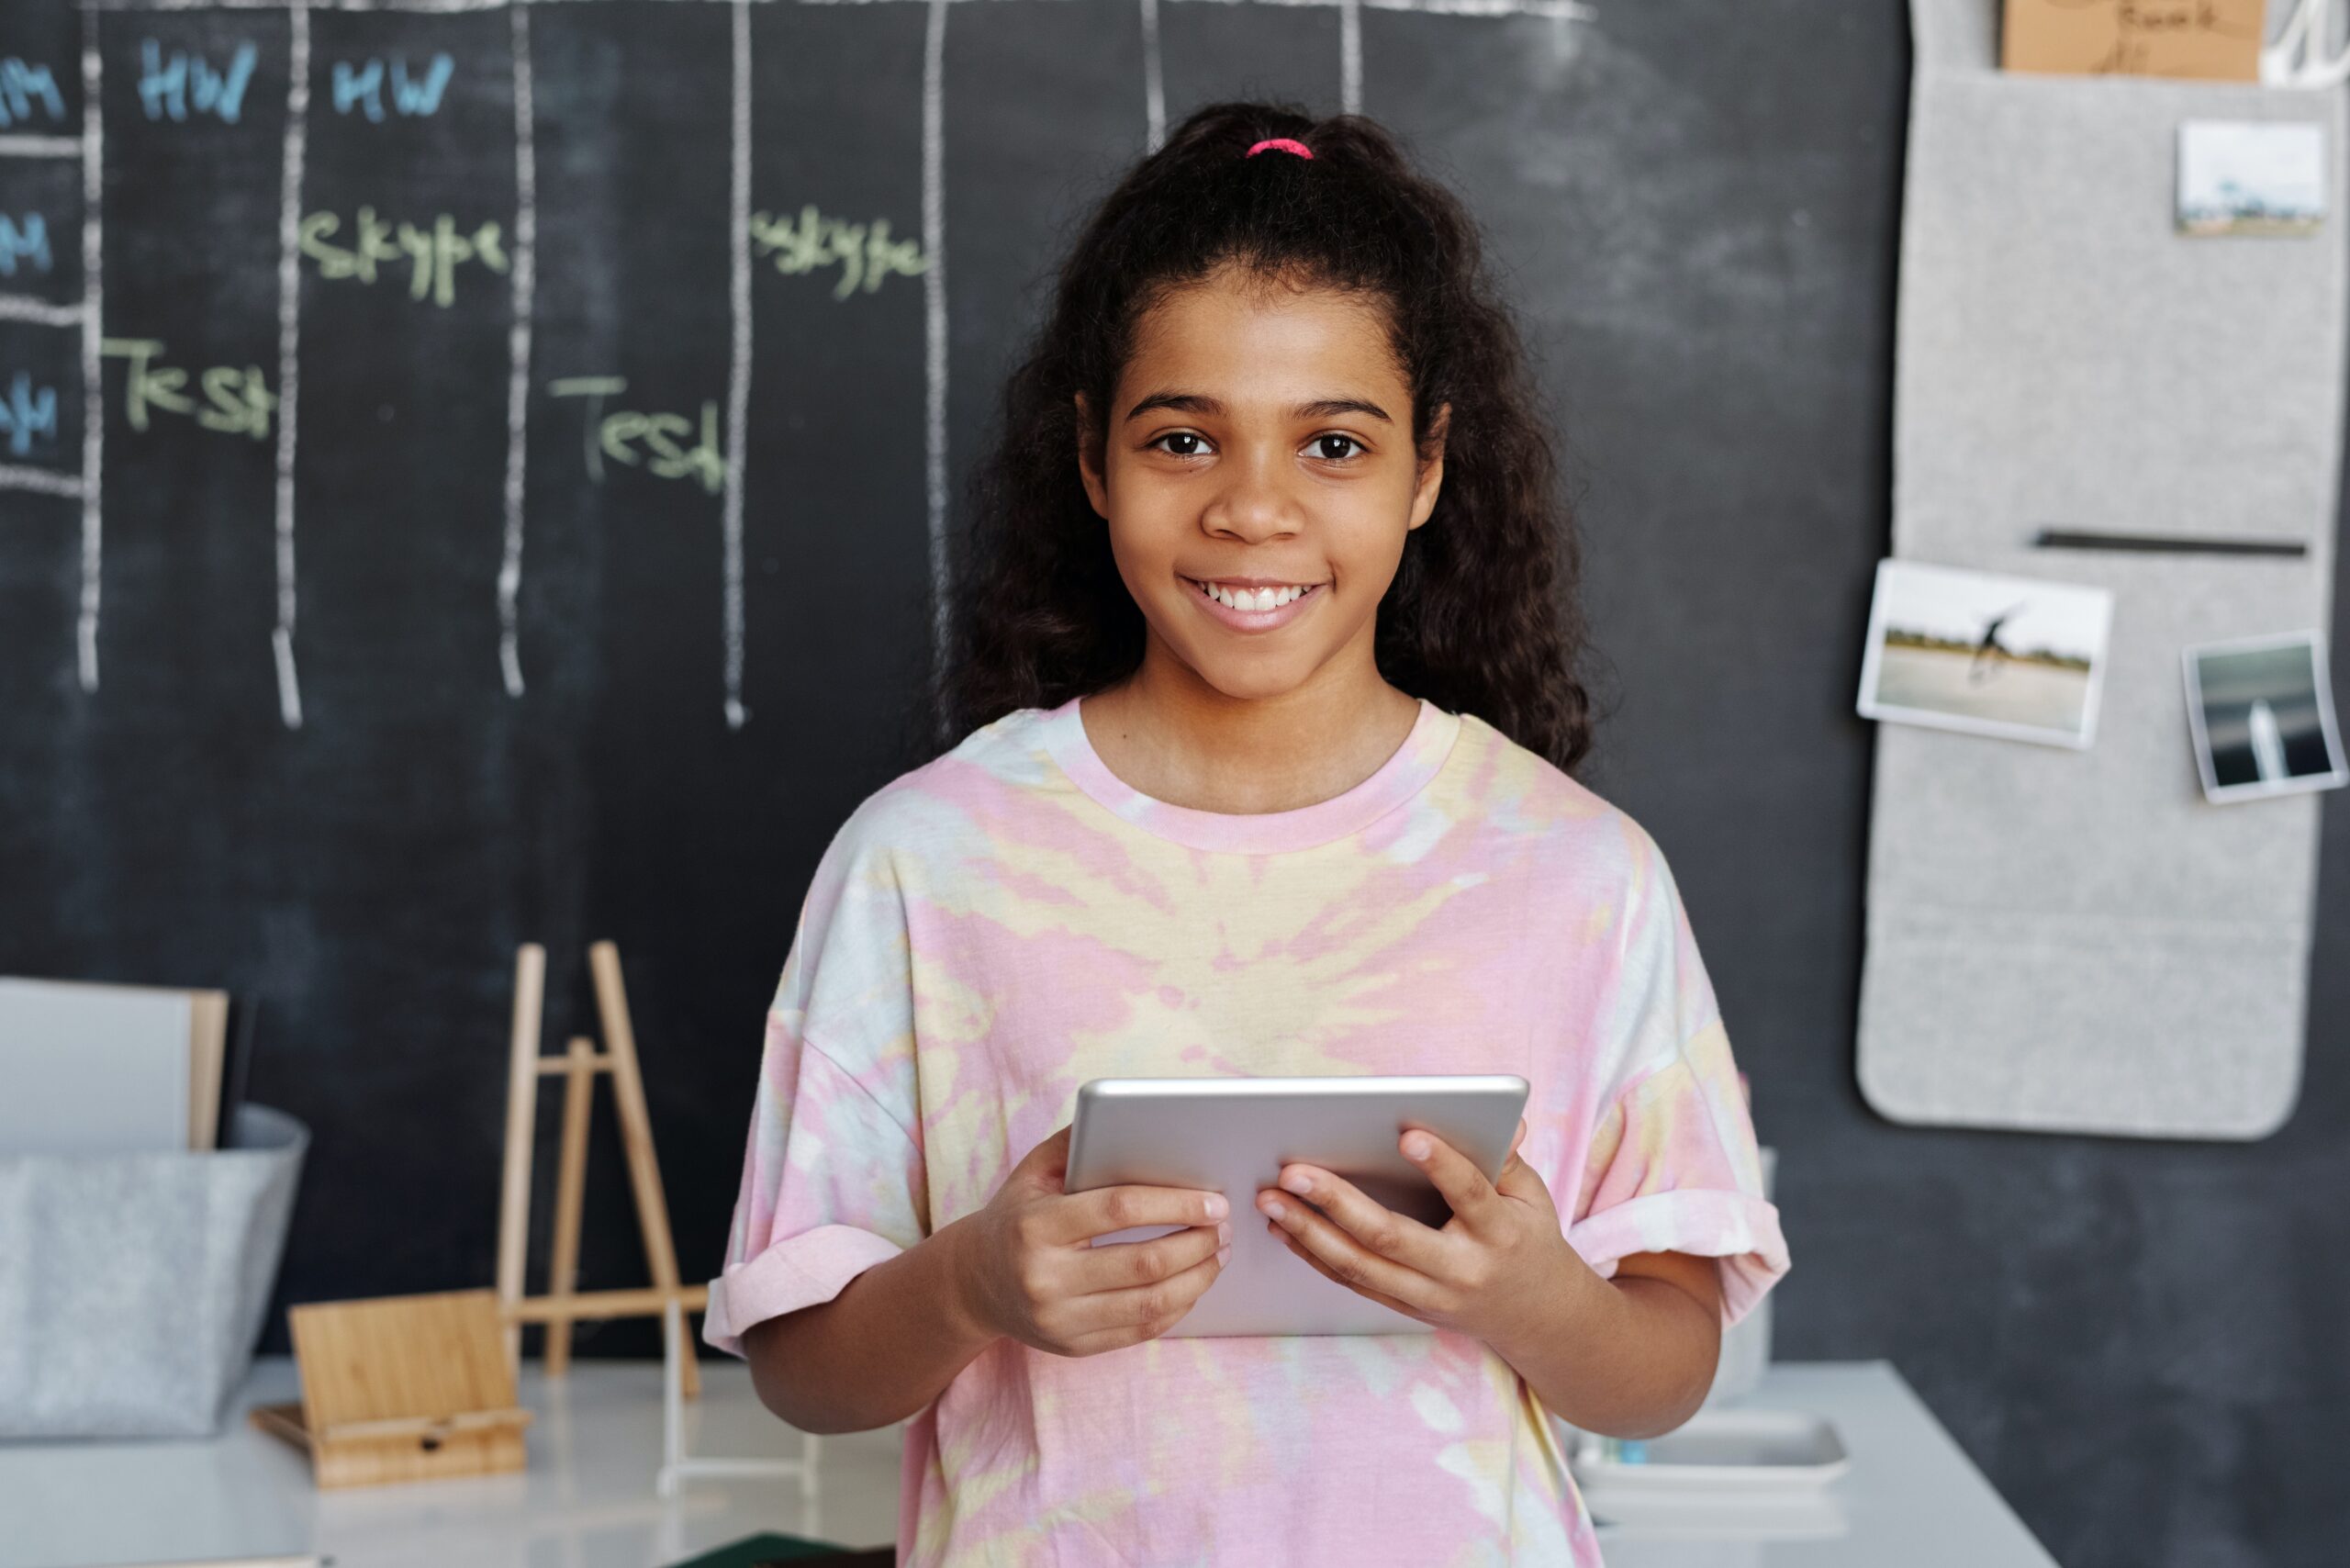 Smiling child holding a tablet in a classroom